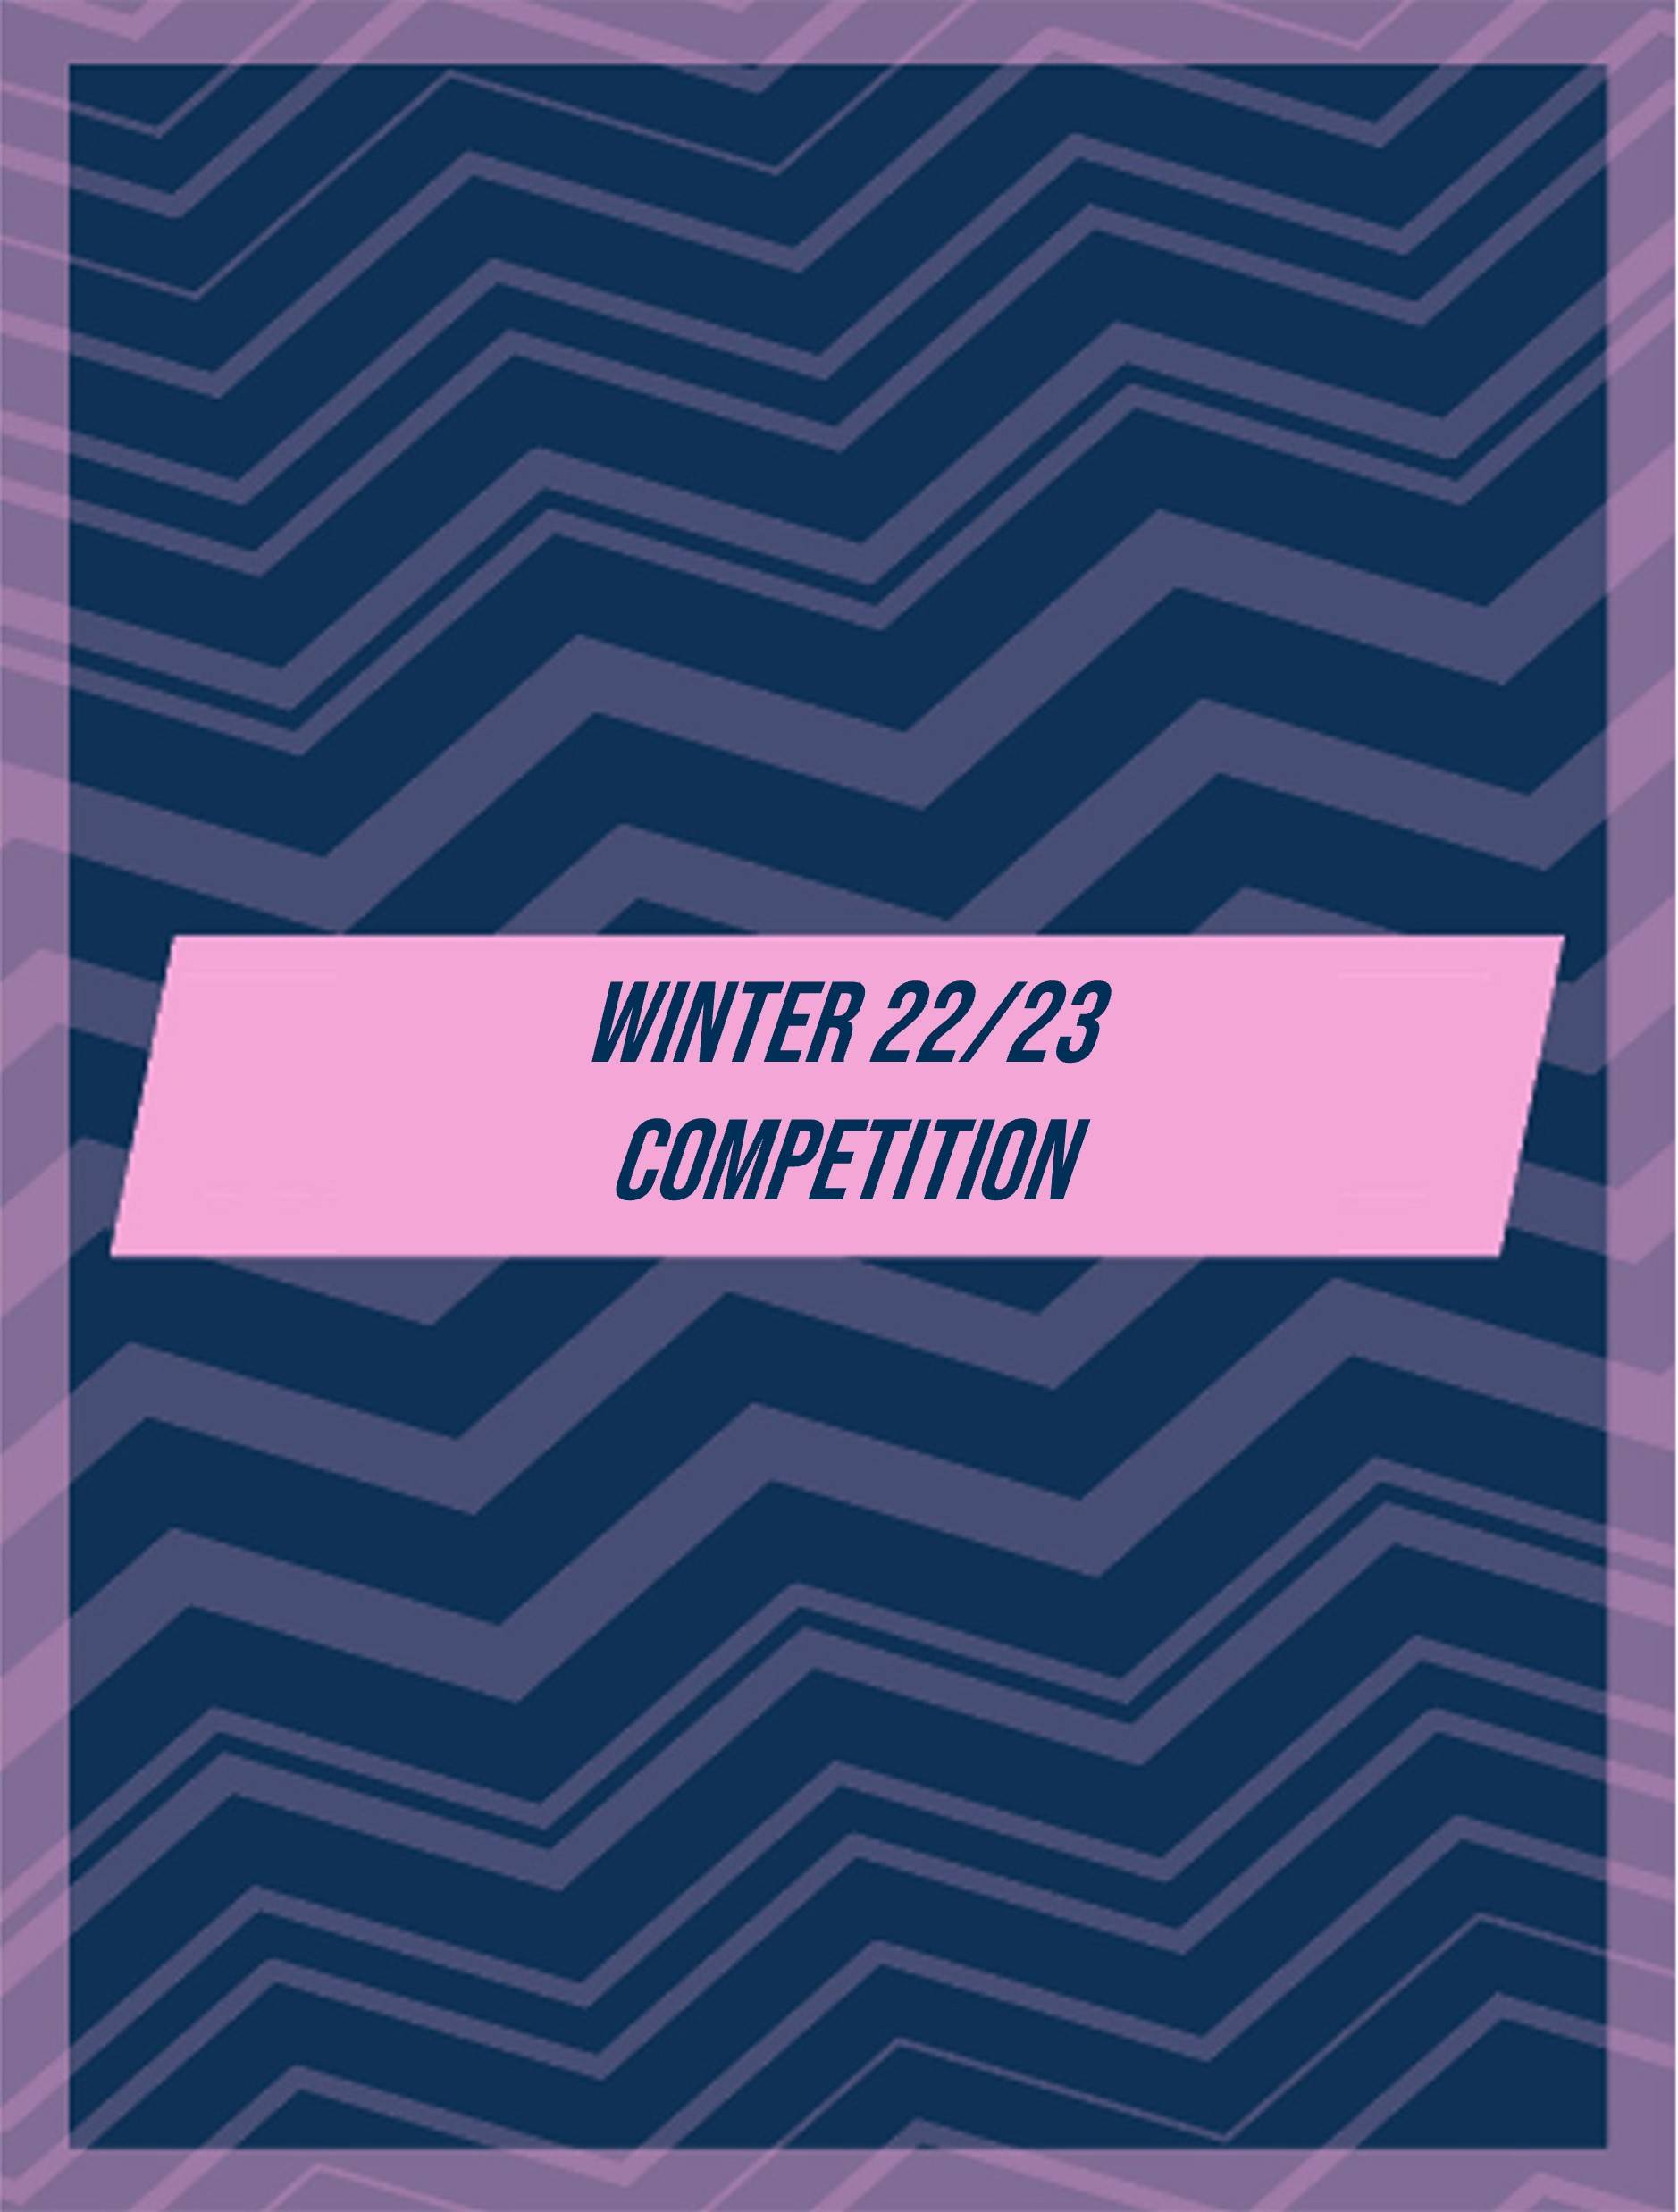 Members Competitions